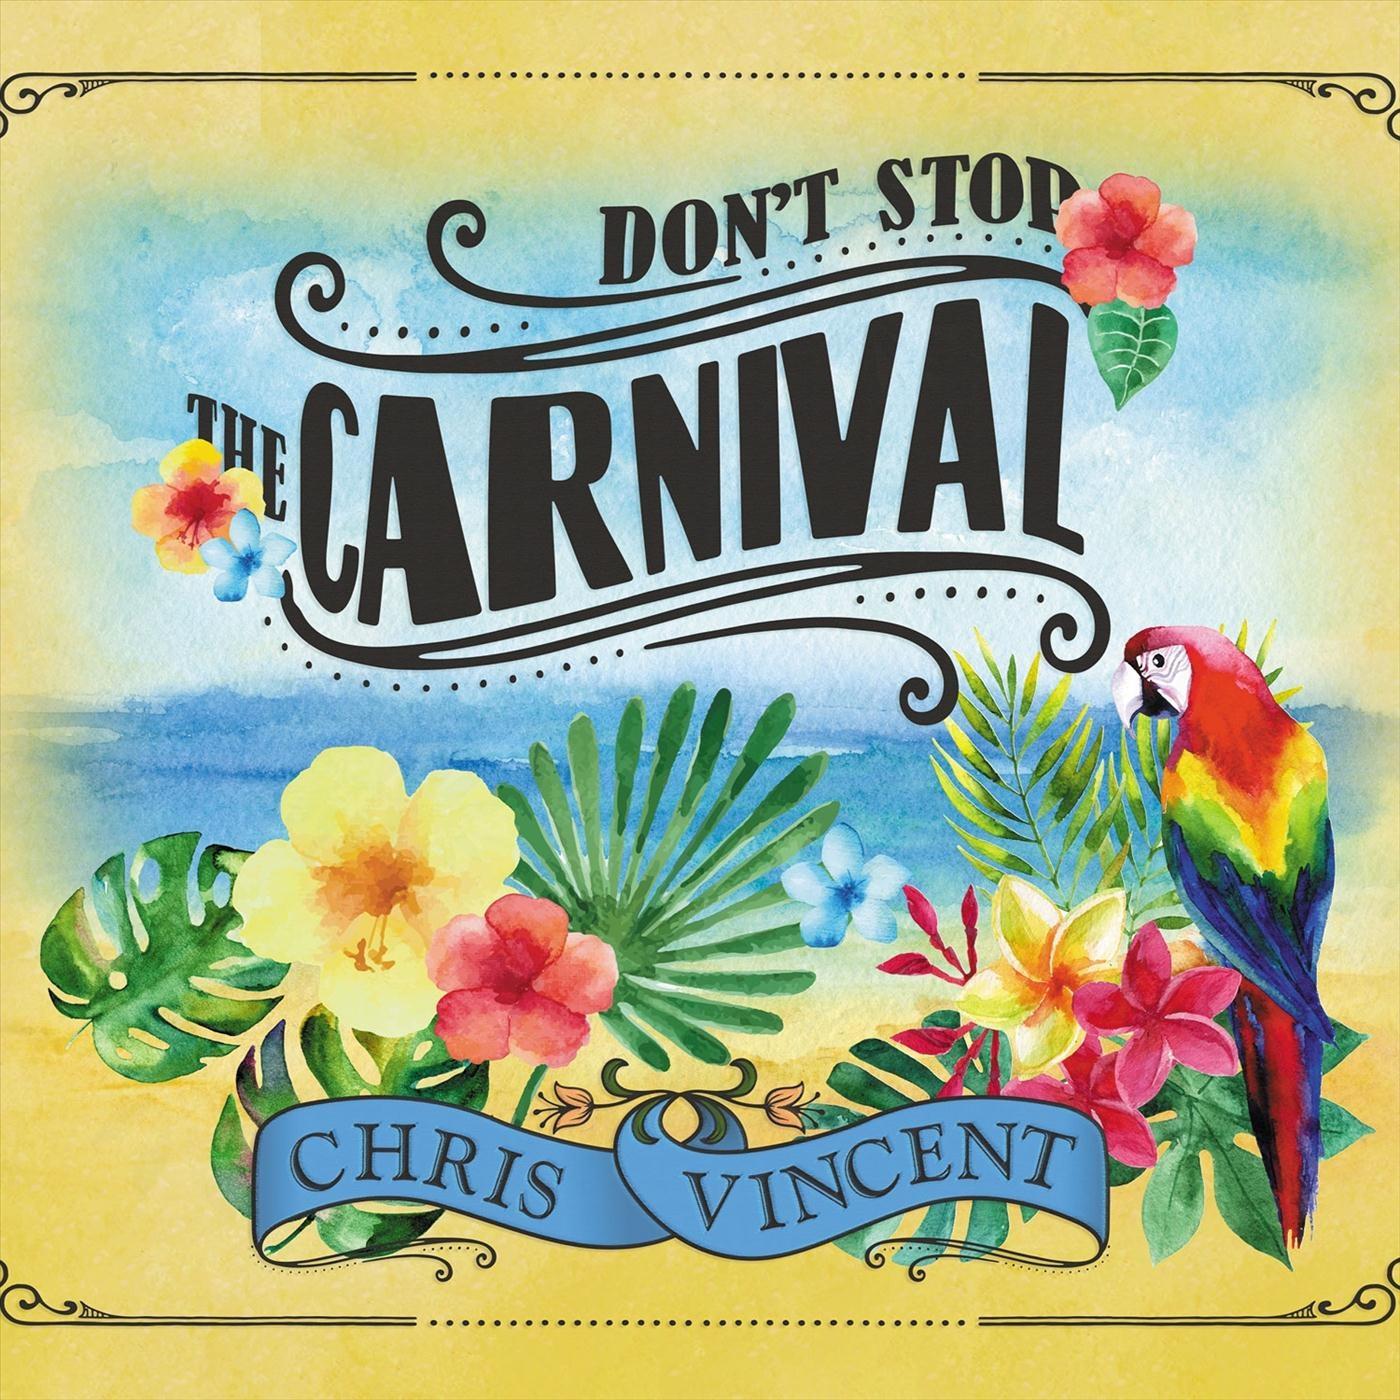 Don't Stop the Carnival